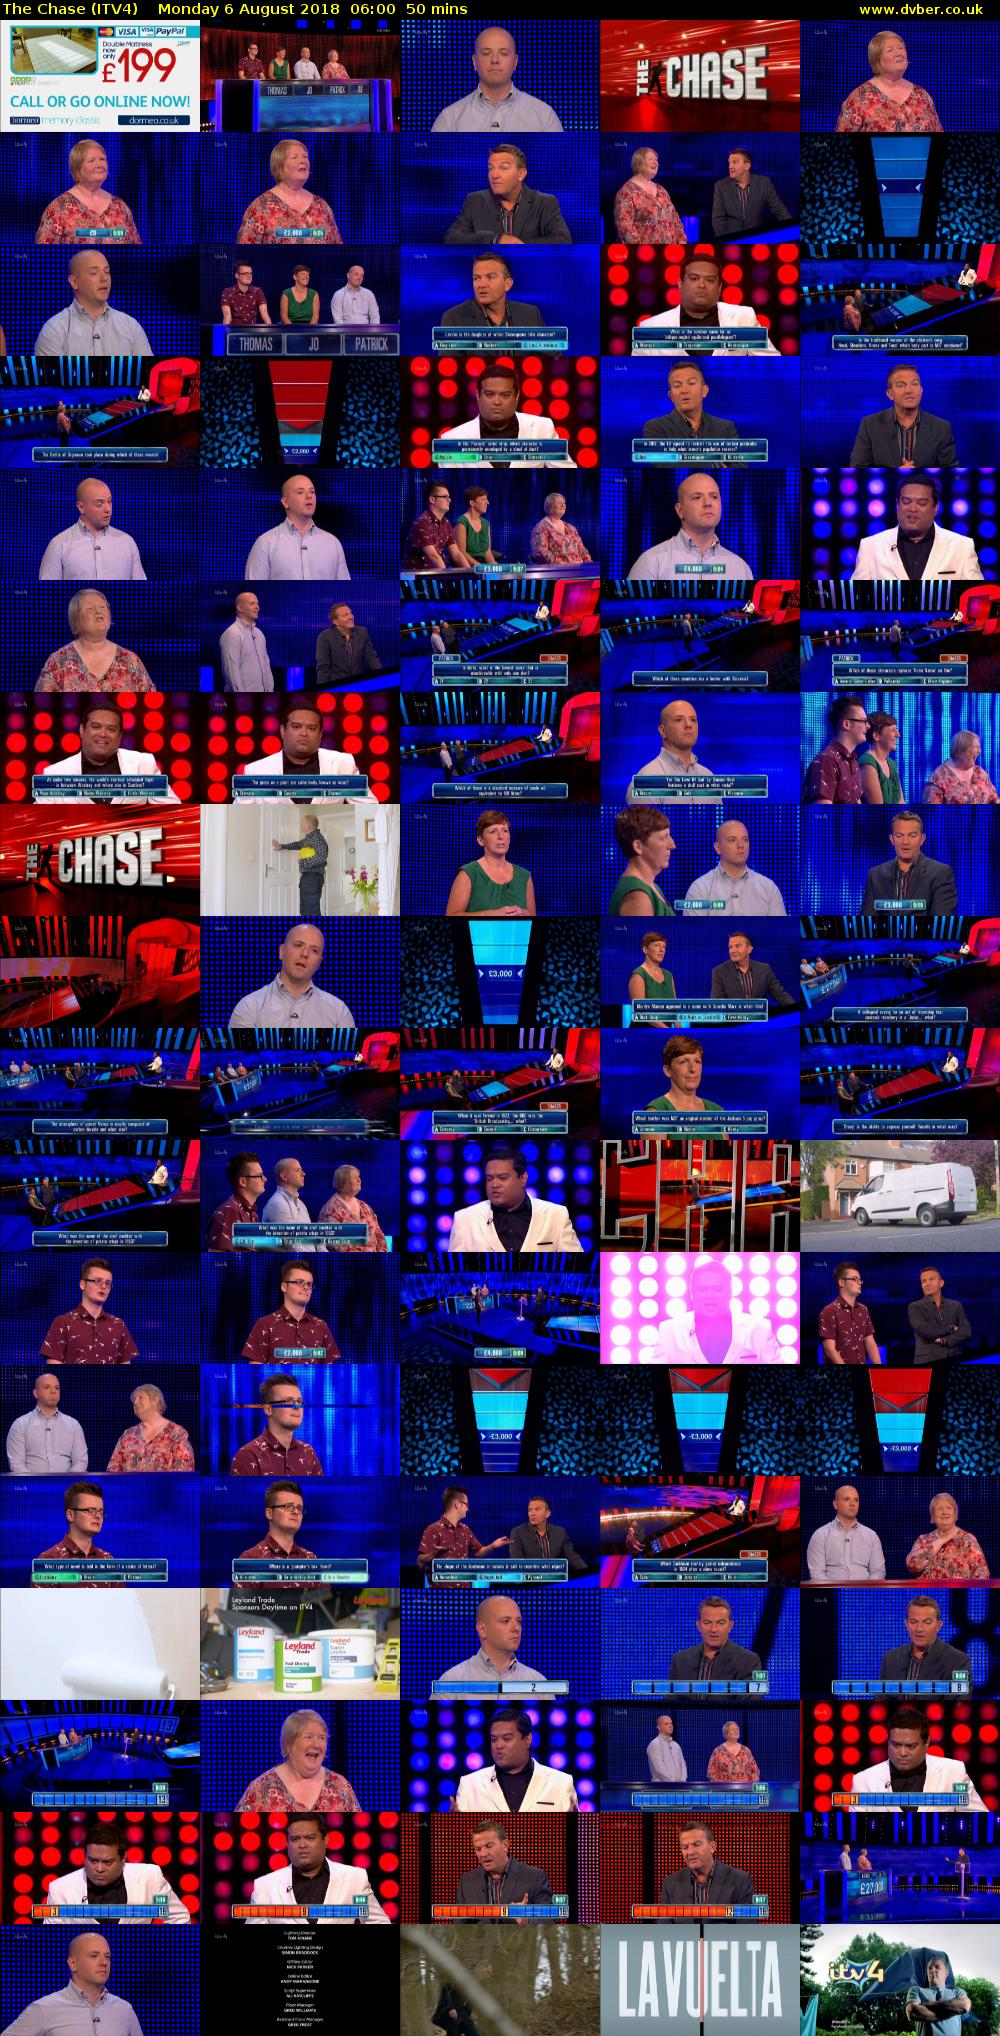 The Chase (ITV4) Monday 6 August 2018 06:00 - 06:50